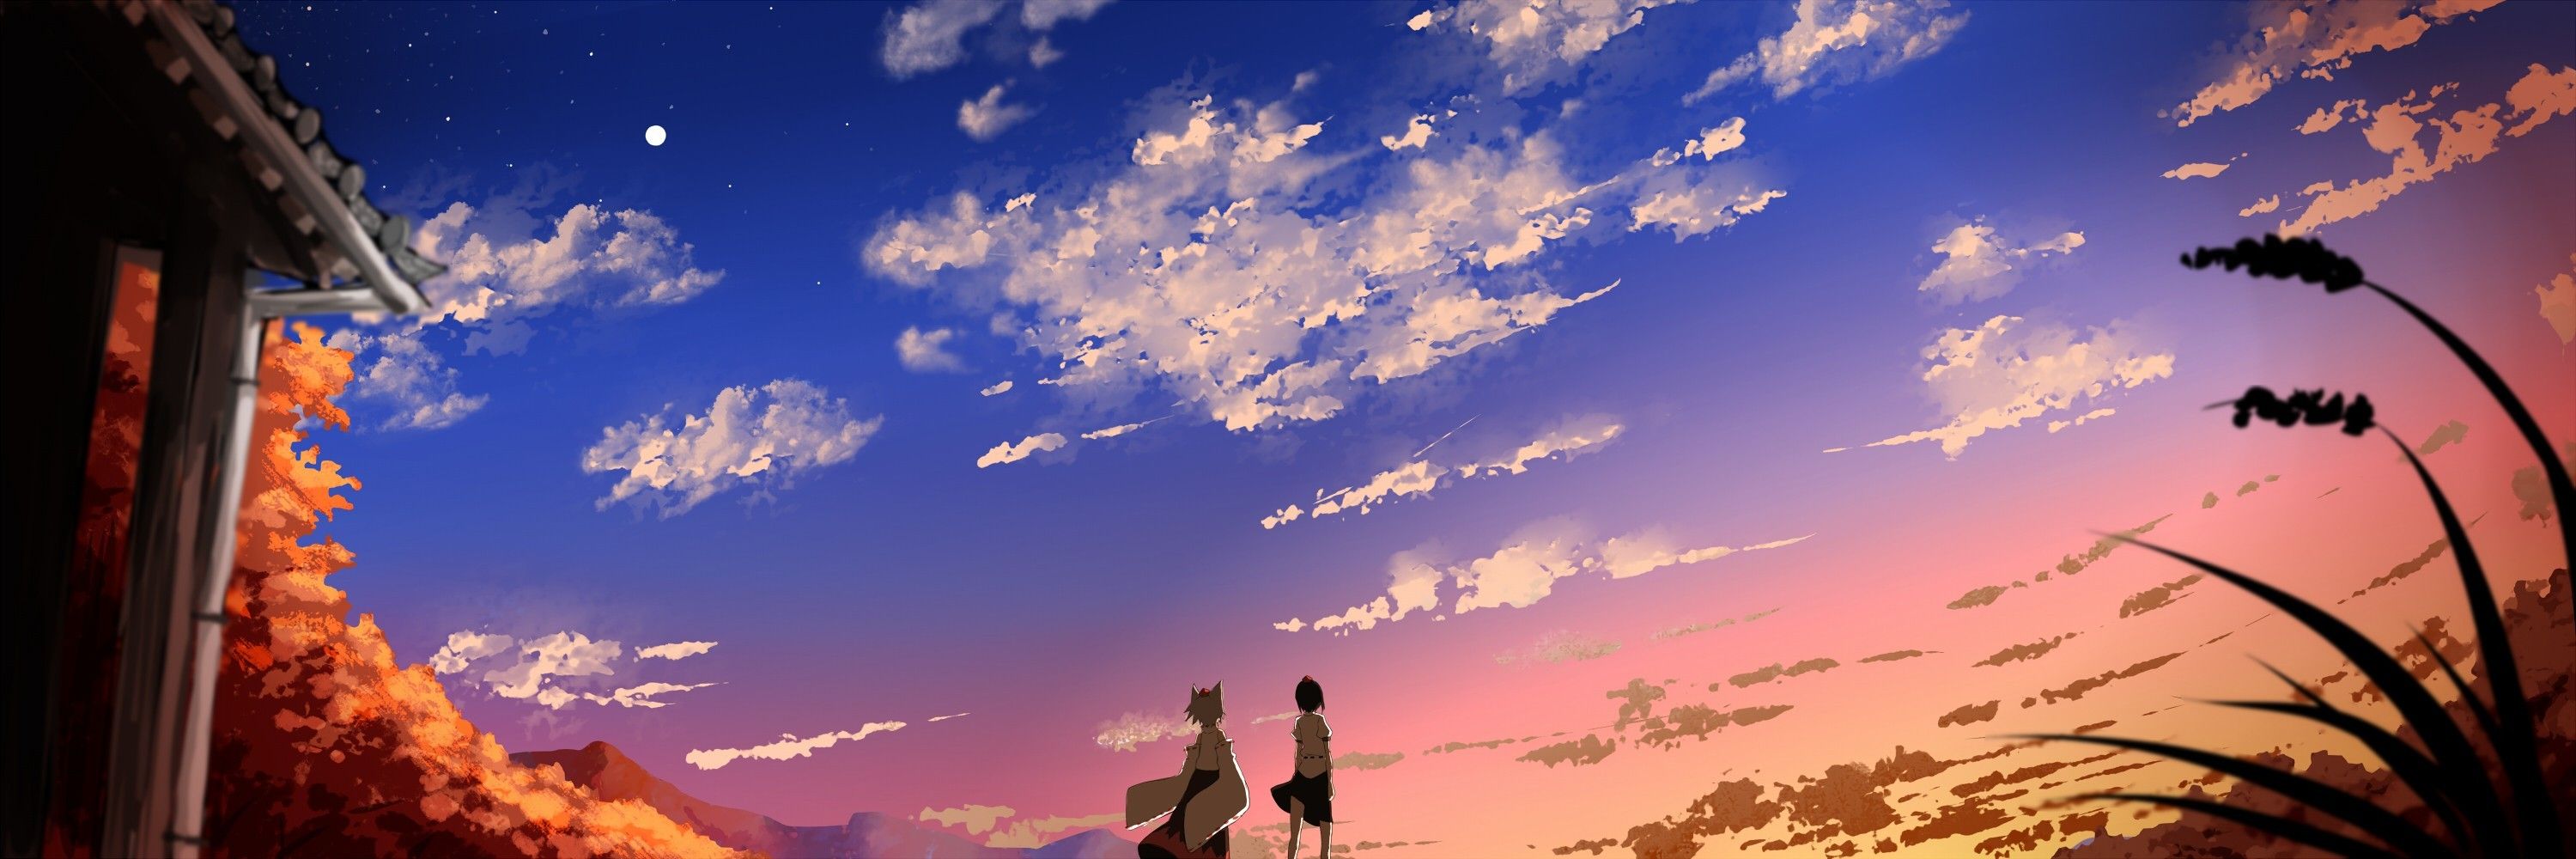 Details more than 88 anime cloud background best - in.duhocakina